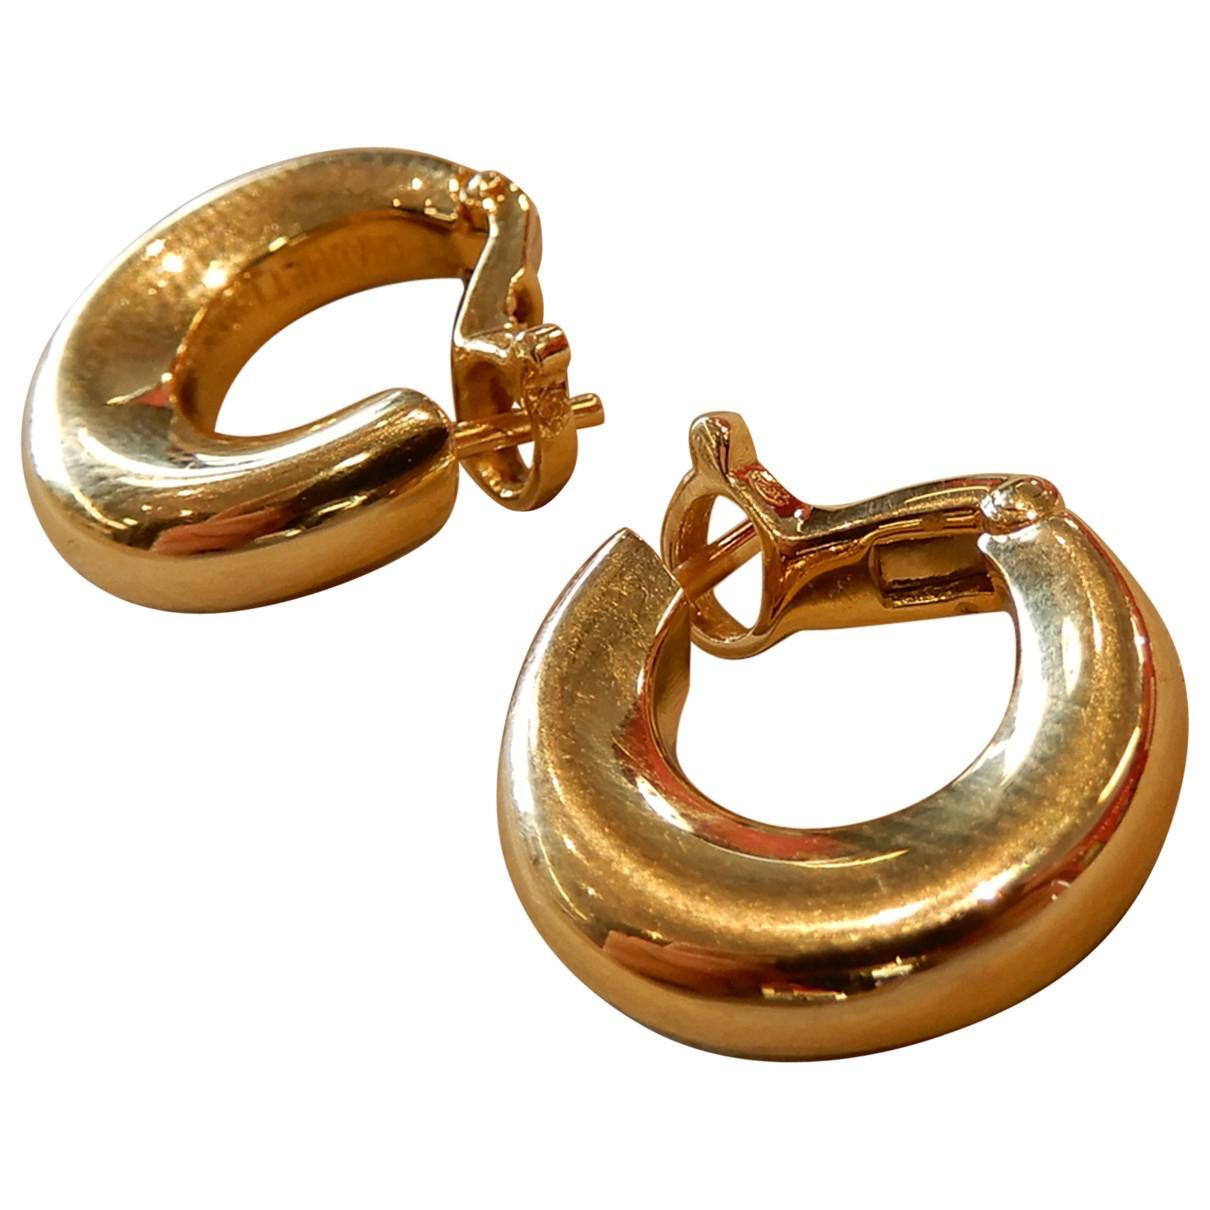 Chaumet large creoles/hoop earrings.

“Anneau” large model.

18 carats yellow gold, 750/000th (hallmark punch).

Within their original box and certificate (1996)
Signed Chaumet and numbered.

Dimensions : 3.4 x 1 cm (1.33 x 0.39 inch)

Weight : 11